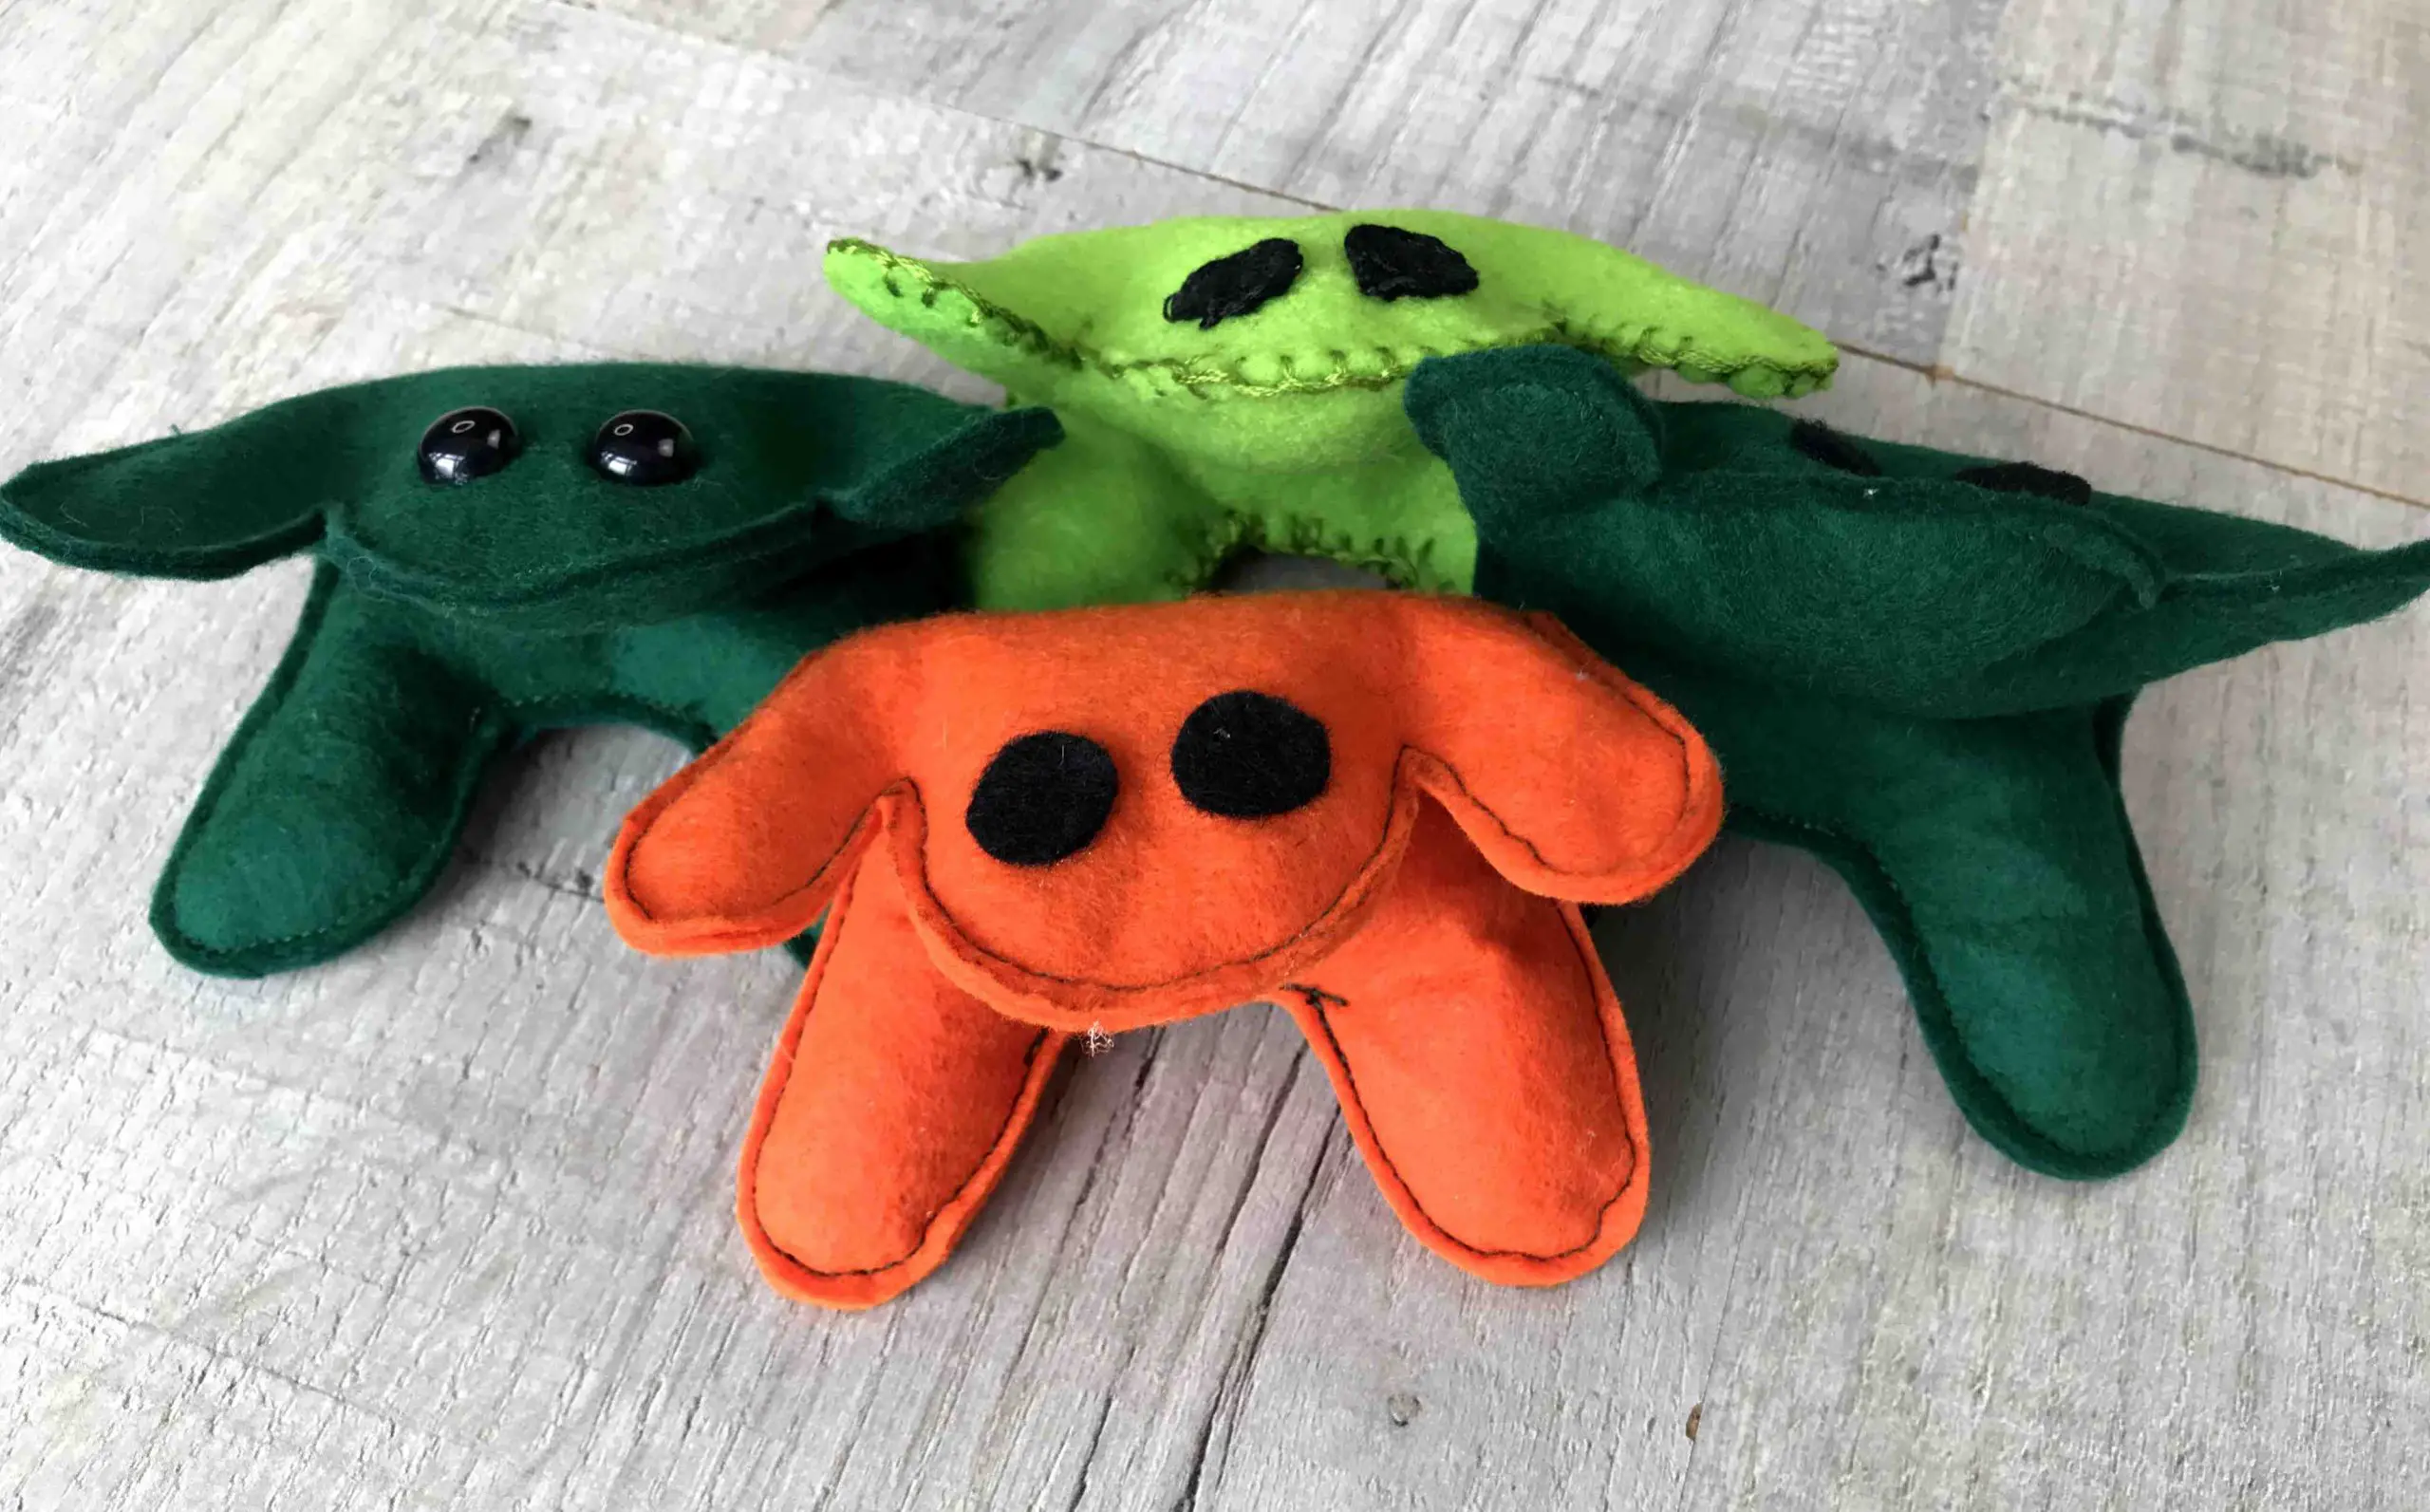 Frog Bean Bag Mascot Toy with Logo